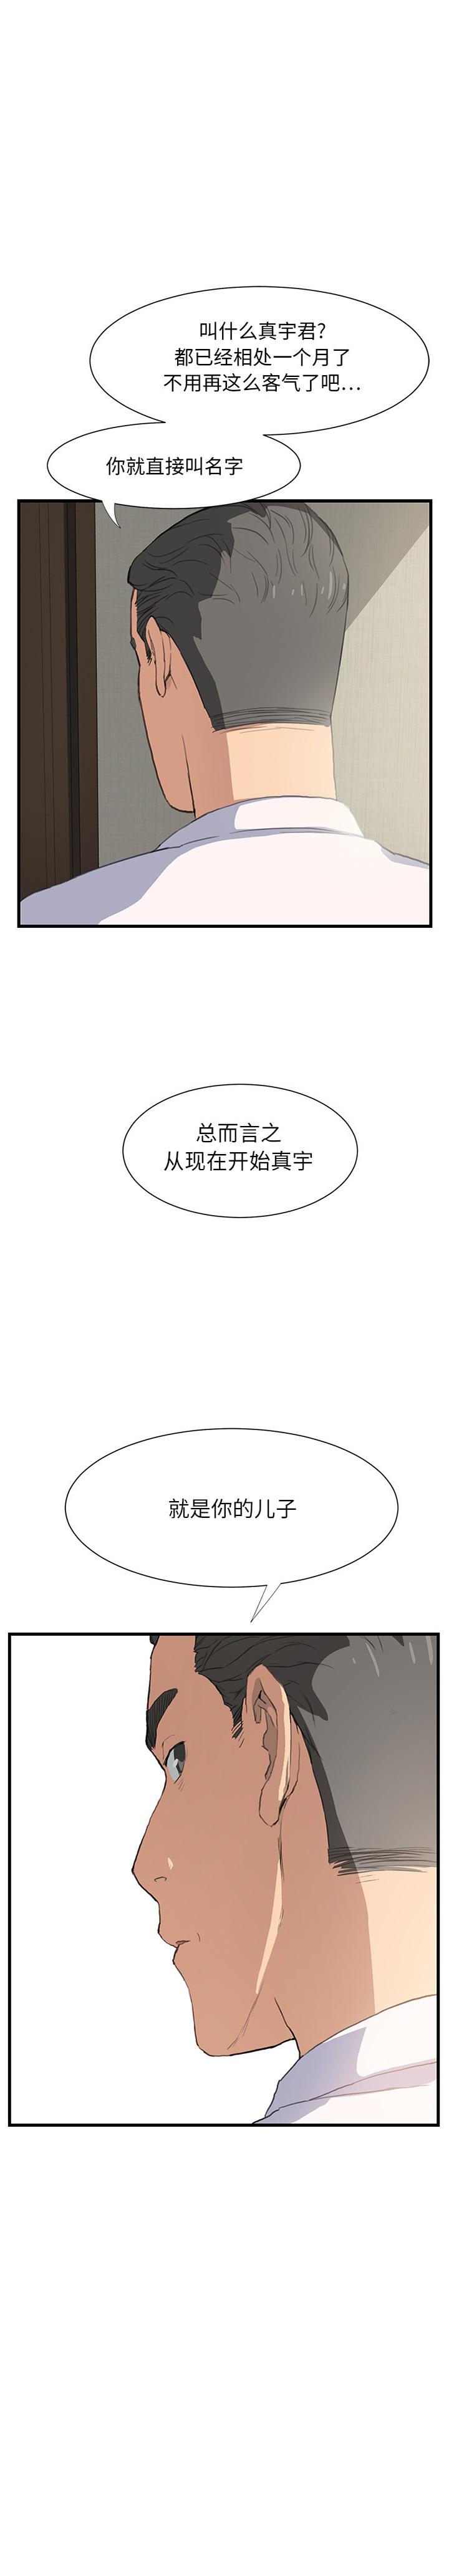 Load 继母 1-8 Chinese Scandal - Page 7